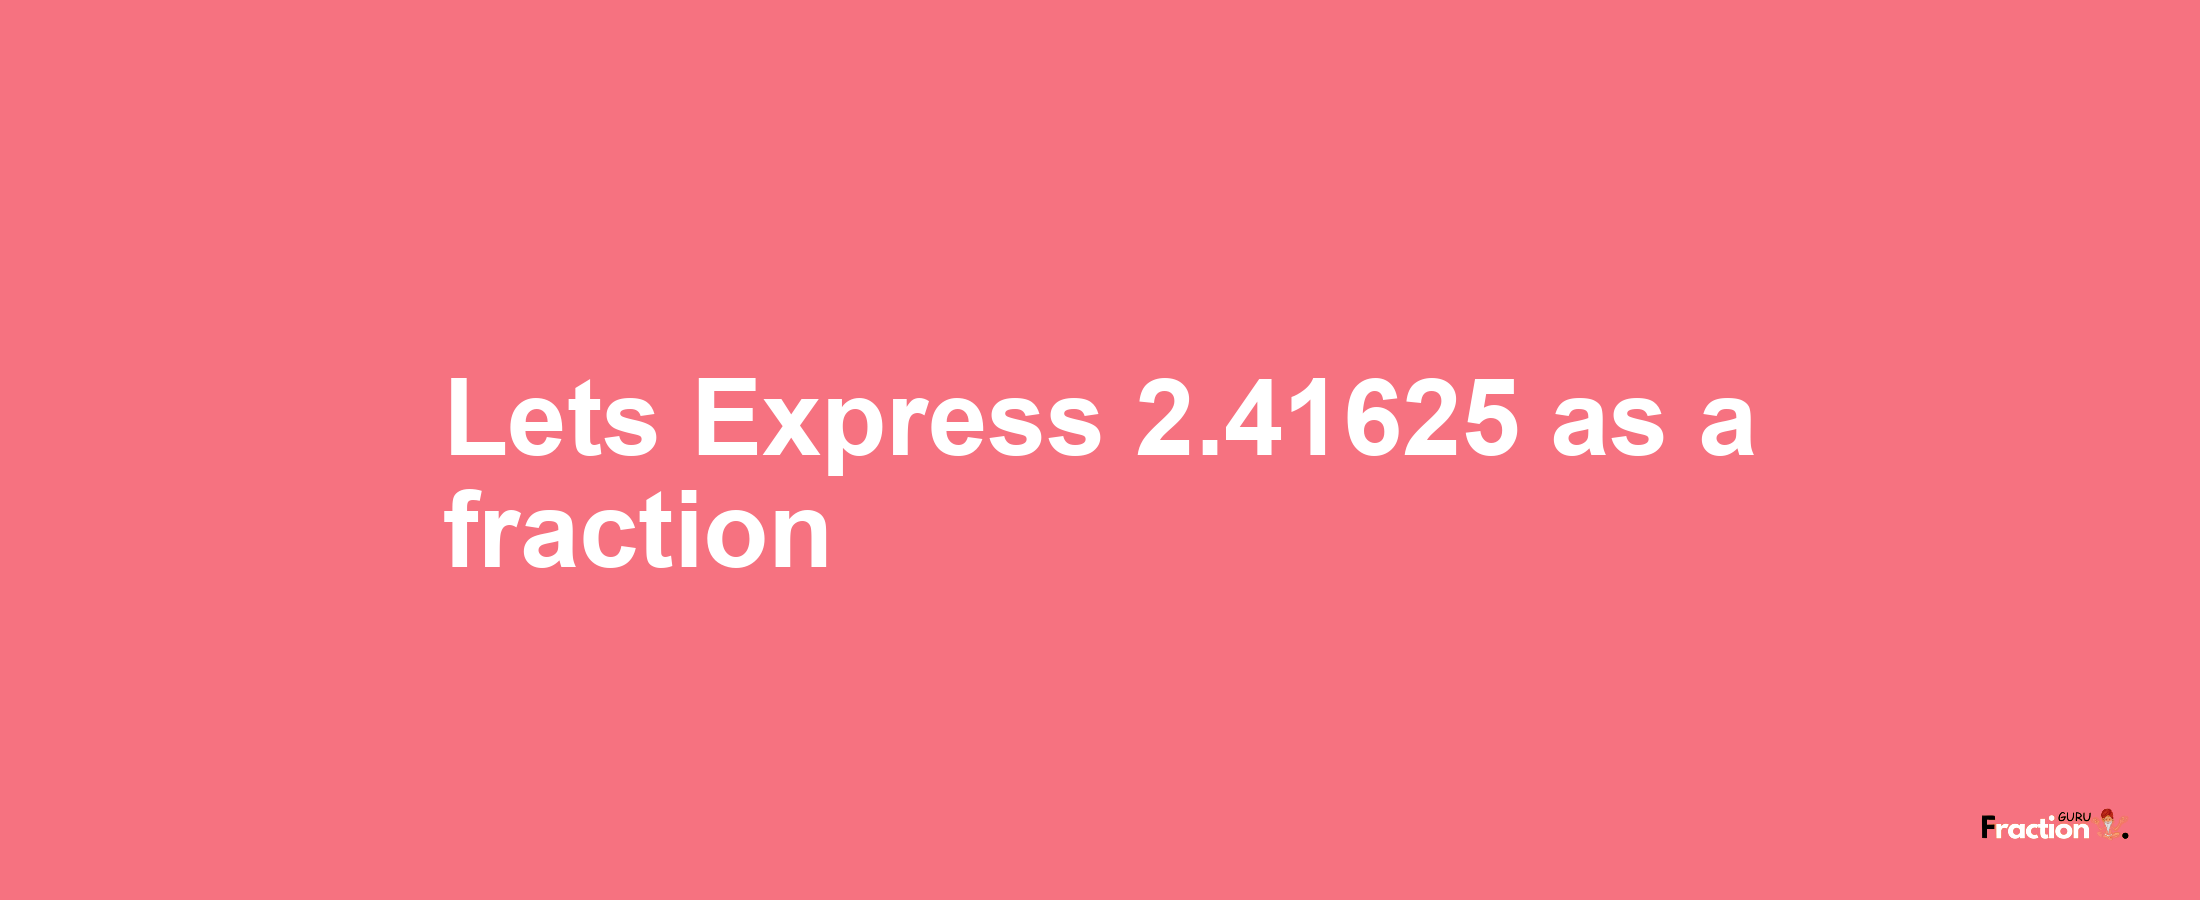 Lets Express 2.41625 as afraction